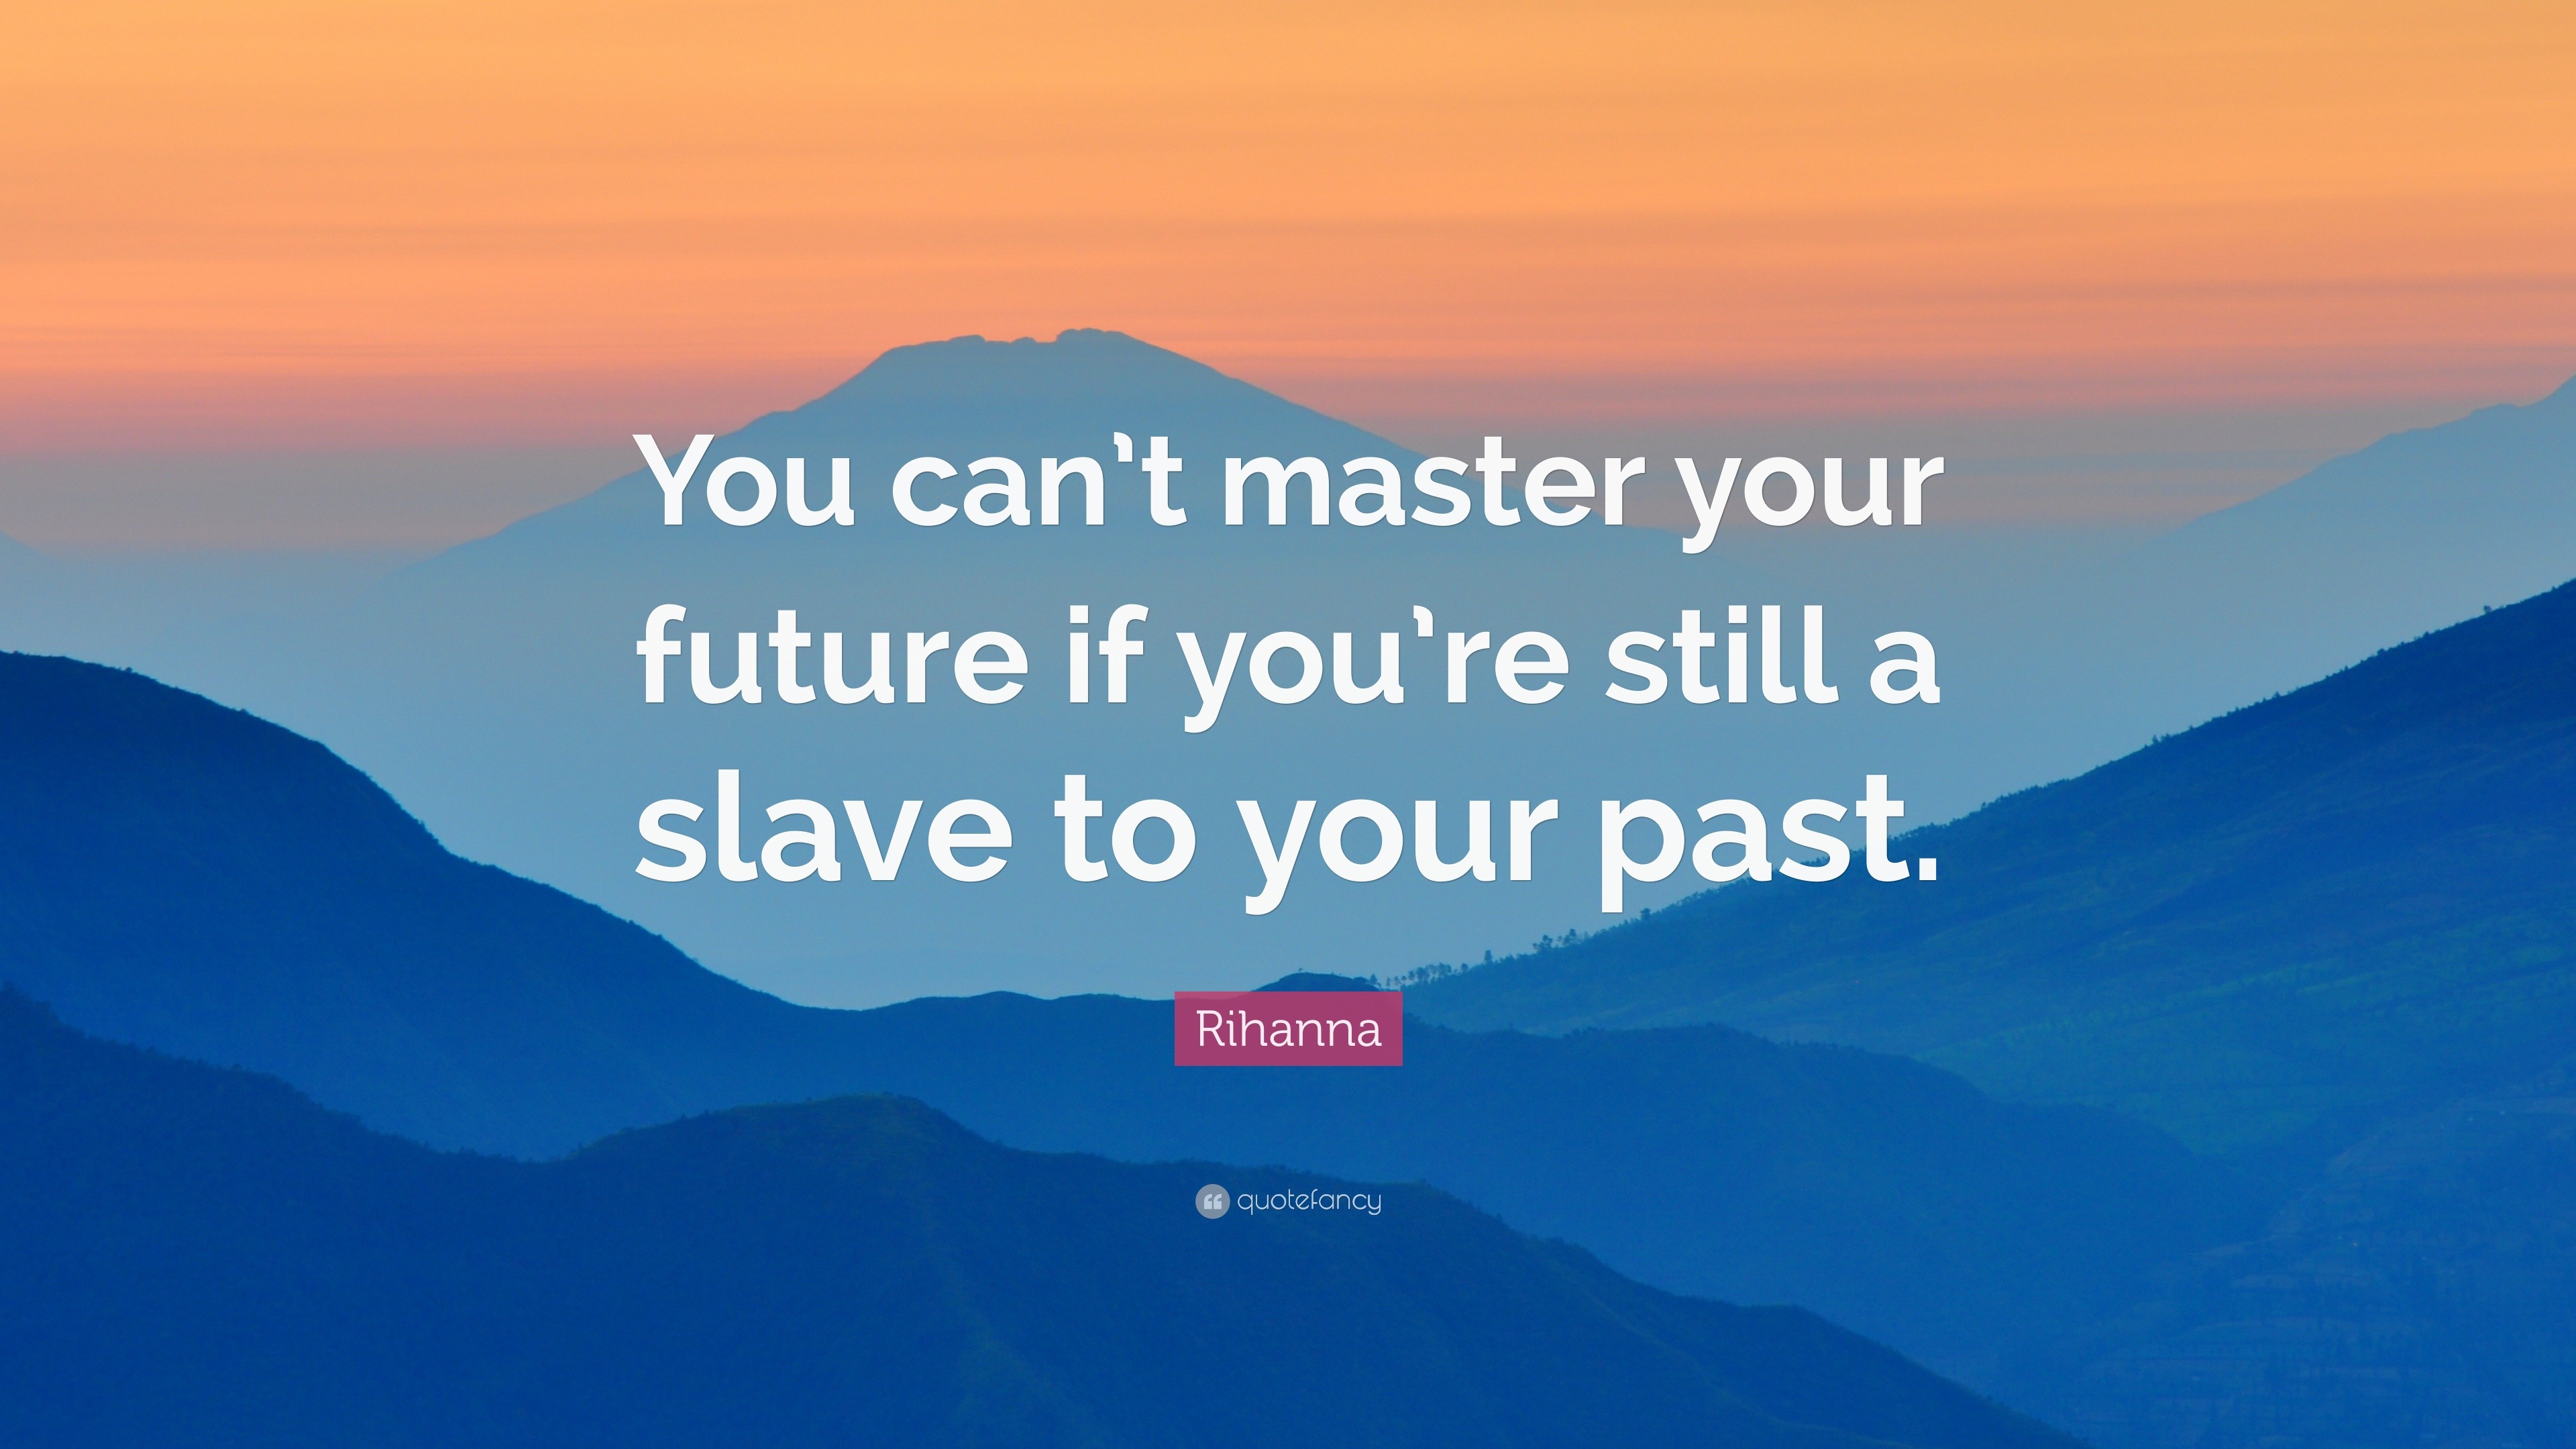 Rihanna Quote: “You can’t master your future if you’re still a slave to